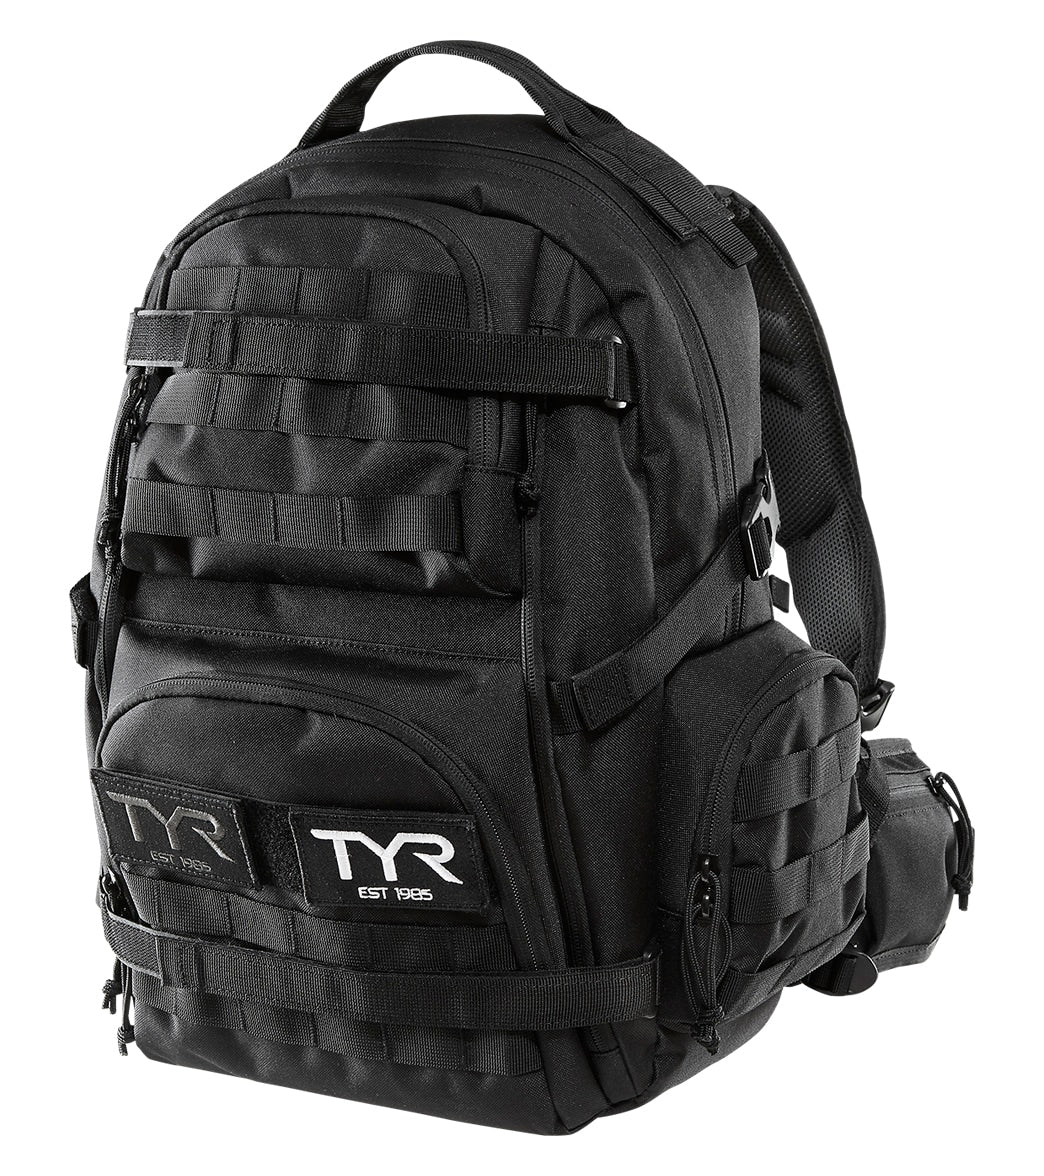 Choosing a Tactical Backpack - All you need to know and more